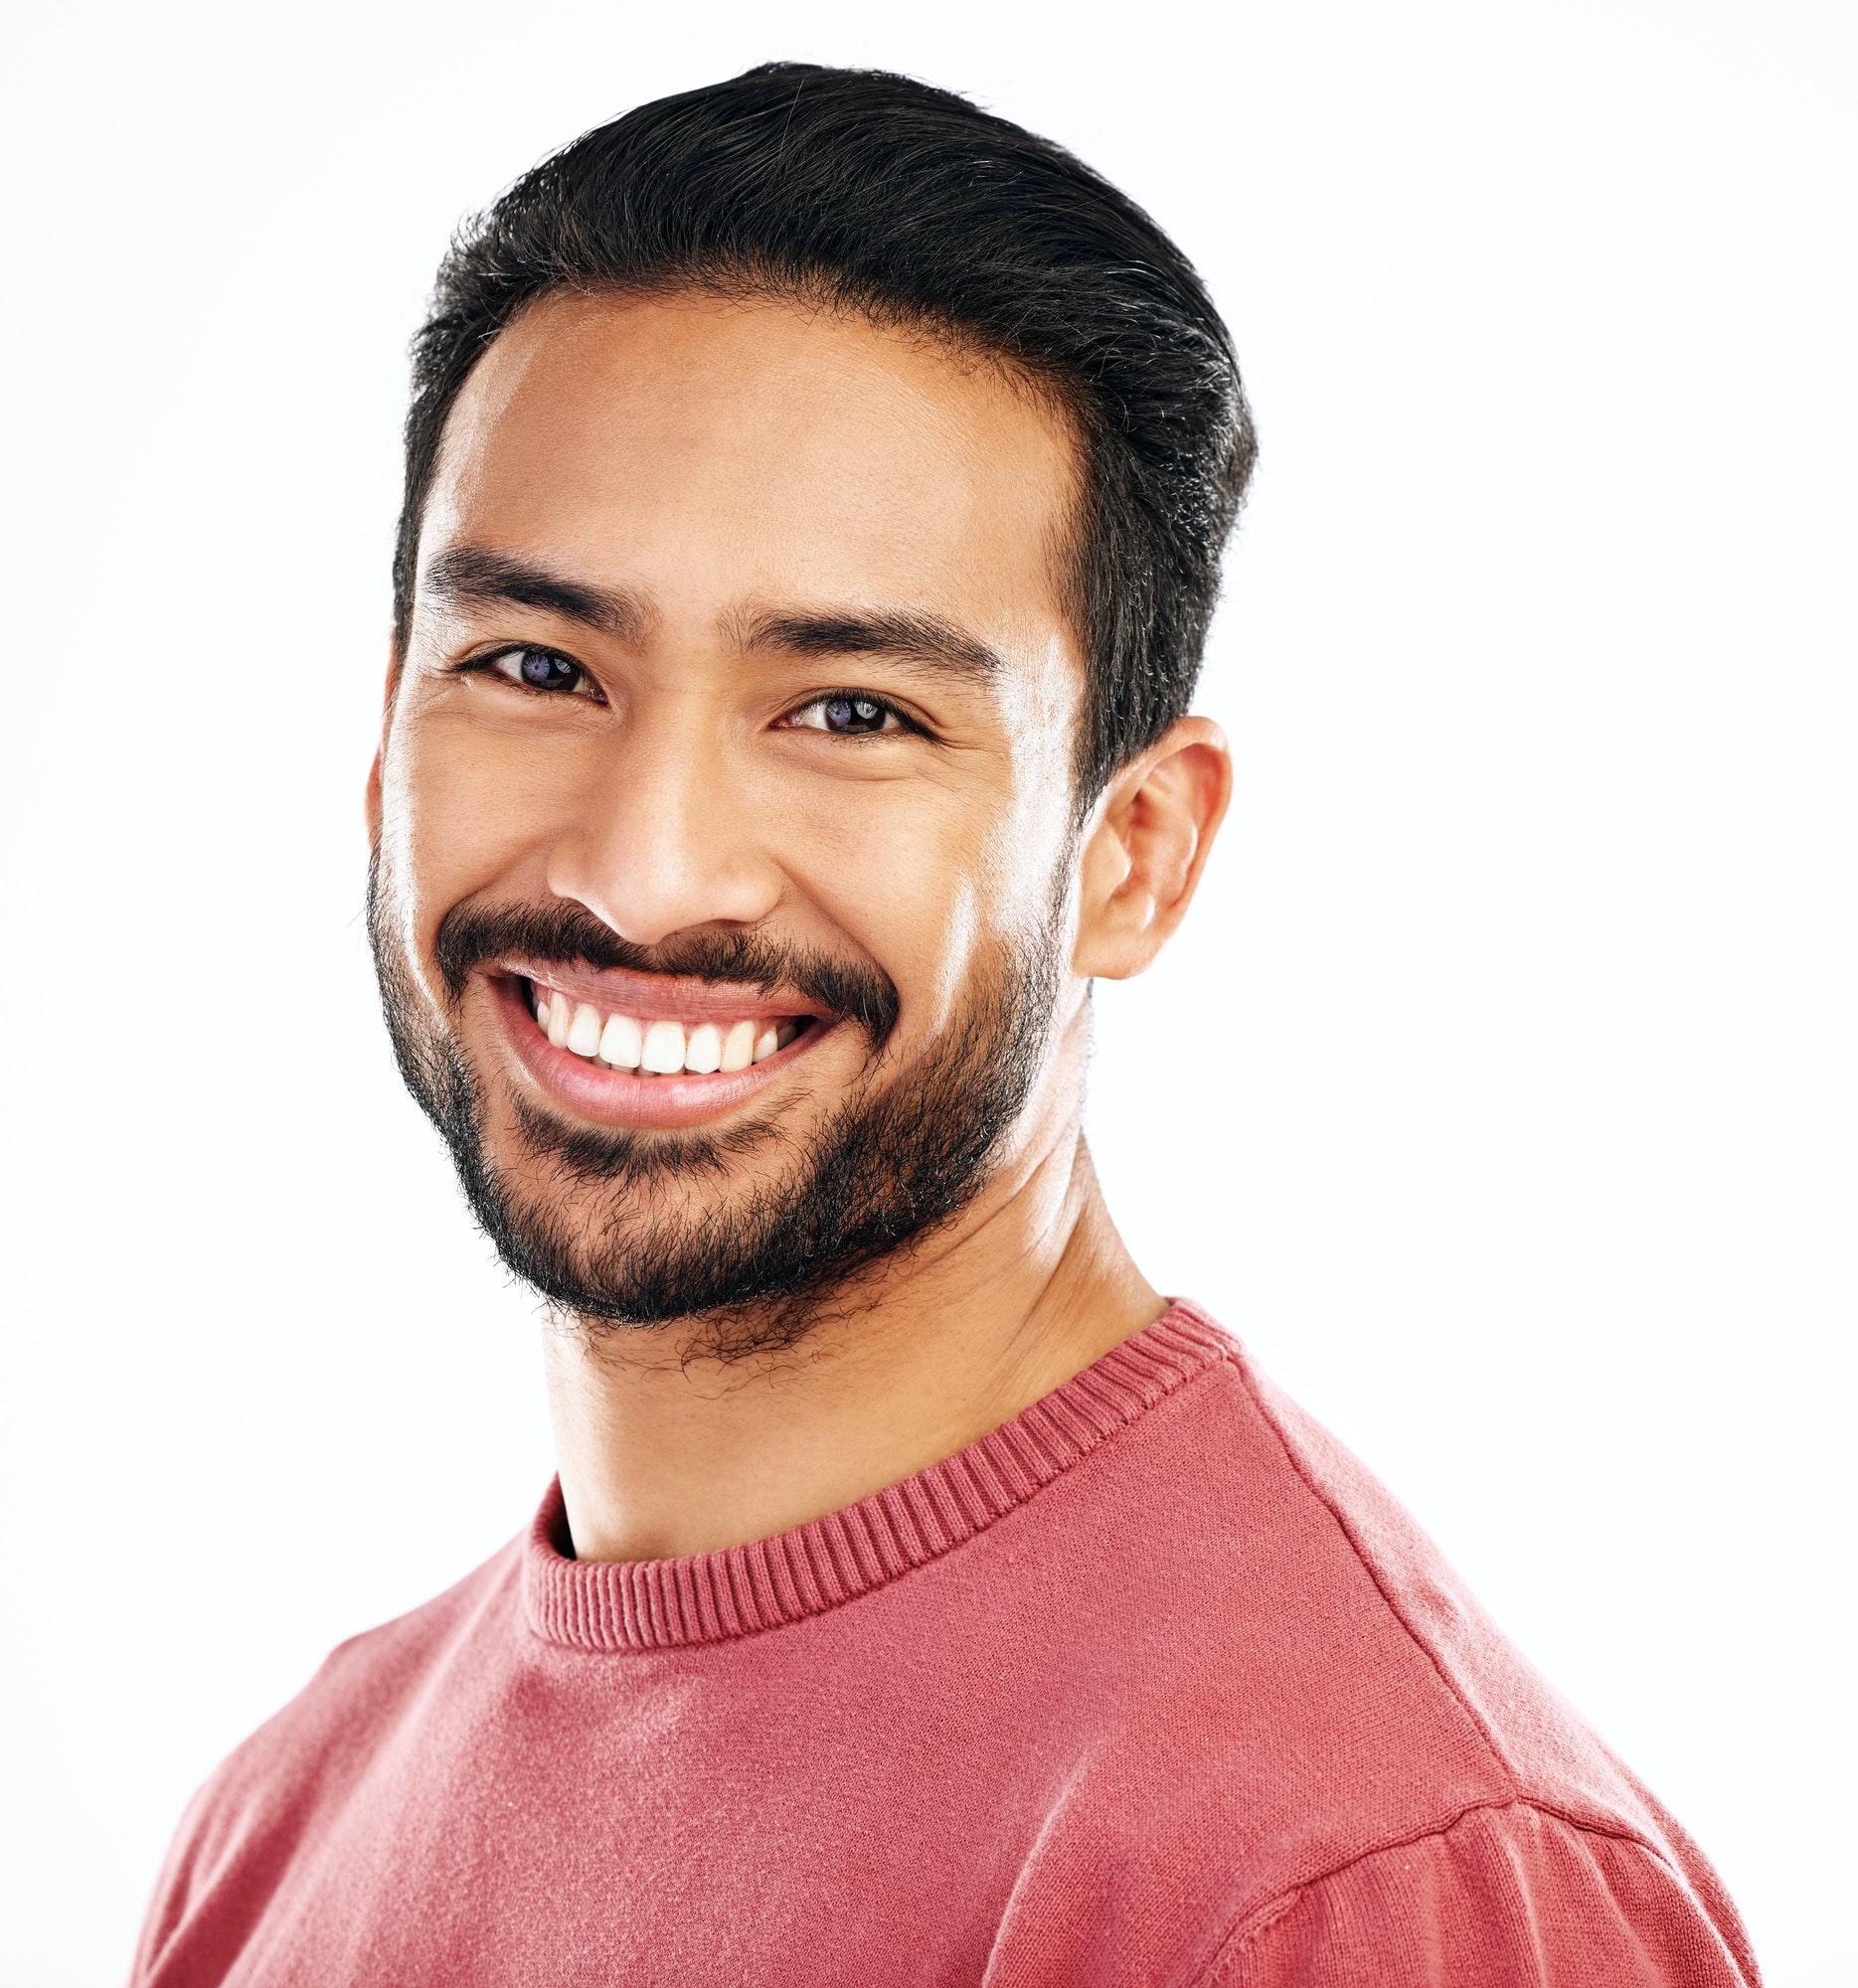 Happy, headshot and portrait of an Asian man with a smile isolated on a white background in a studi